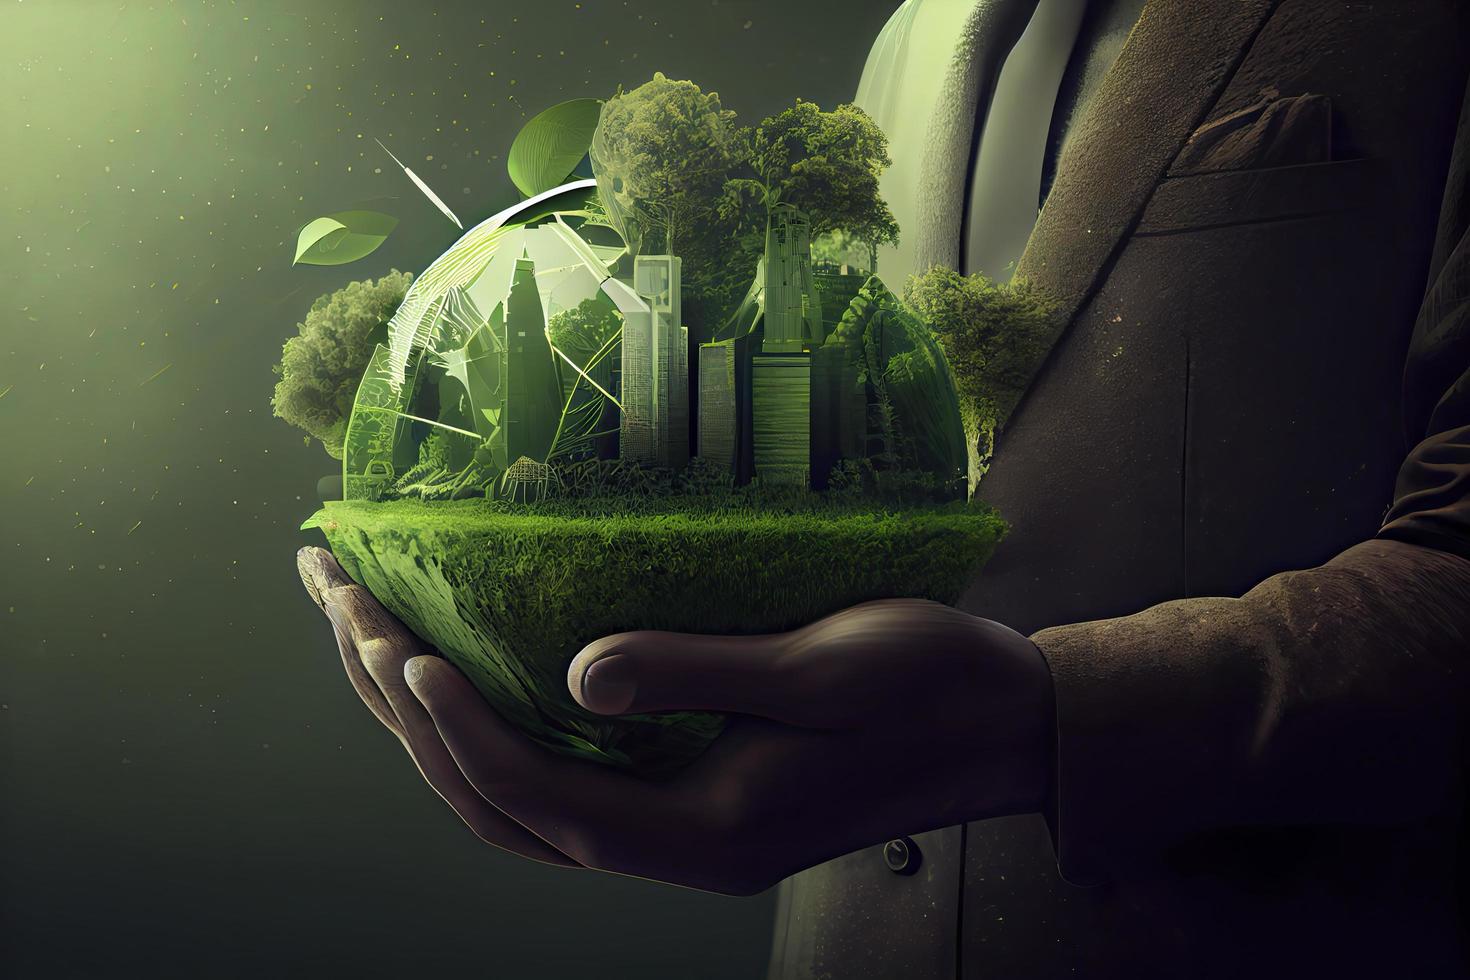 green energy, sustainable industry. Environmental, Social, and Corporate Governance concept photo